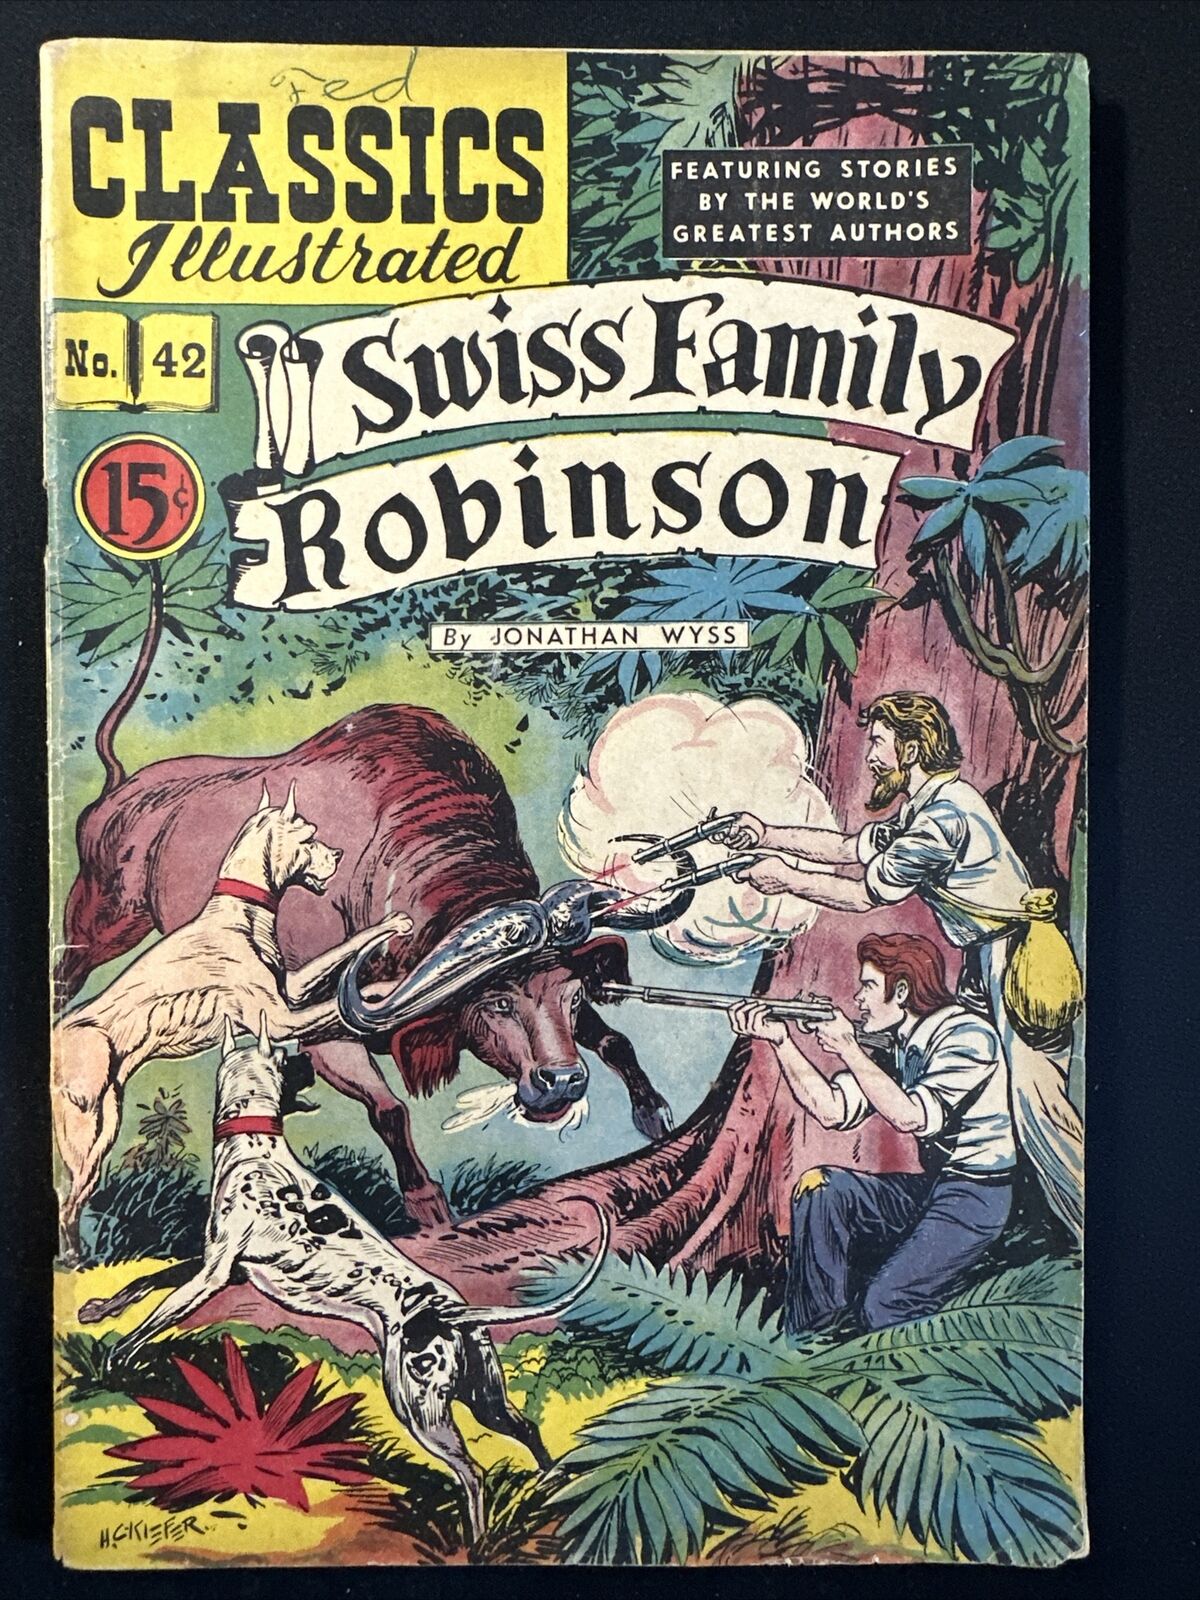 Swiss Family Robinson #42 HRN 44 ???Canadian ??? Classic Illustrated Comics G/VG